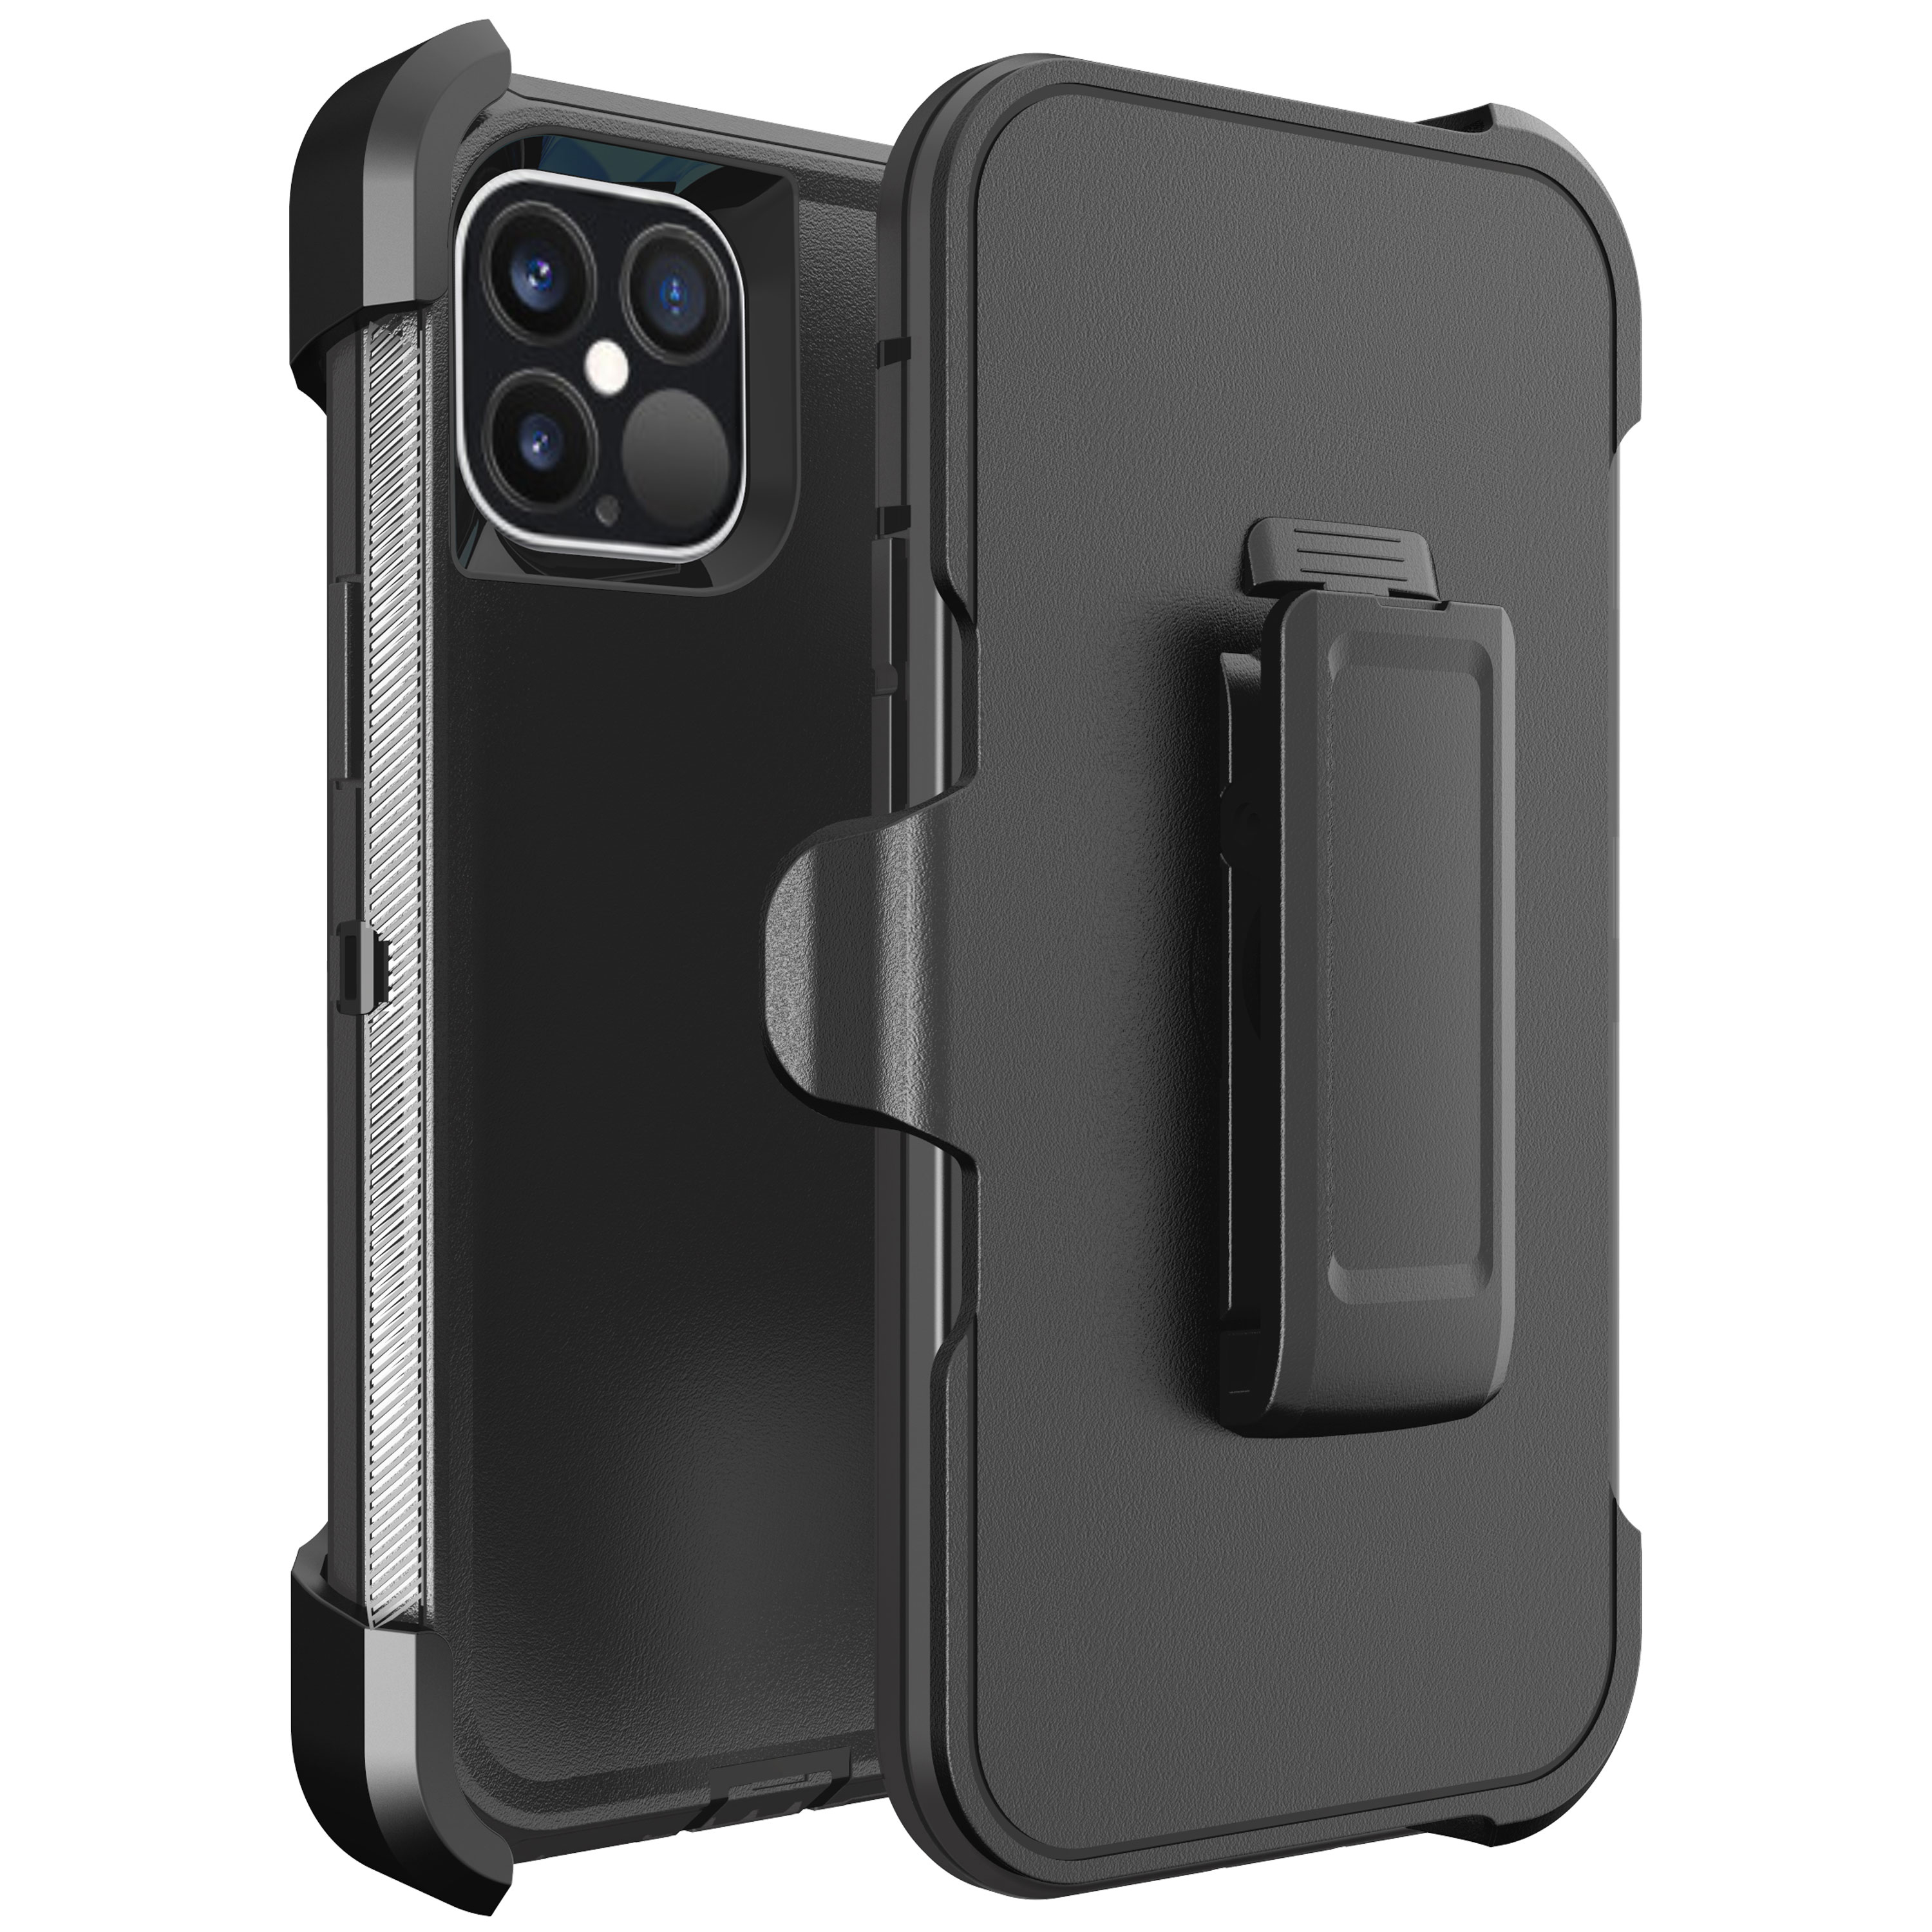 Armor Robot Case With Clip for iPHONE 12 Mini 5.4 (Black)